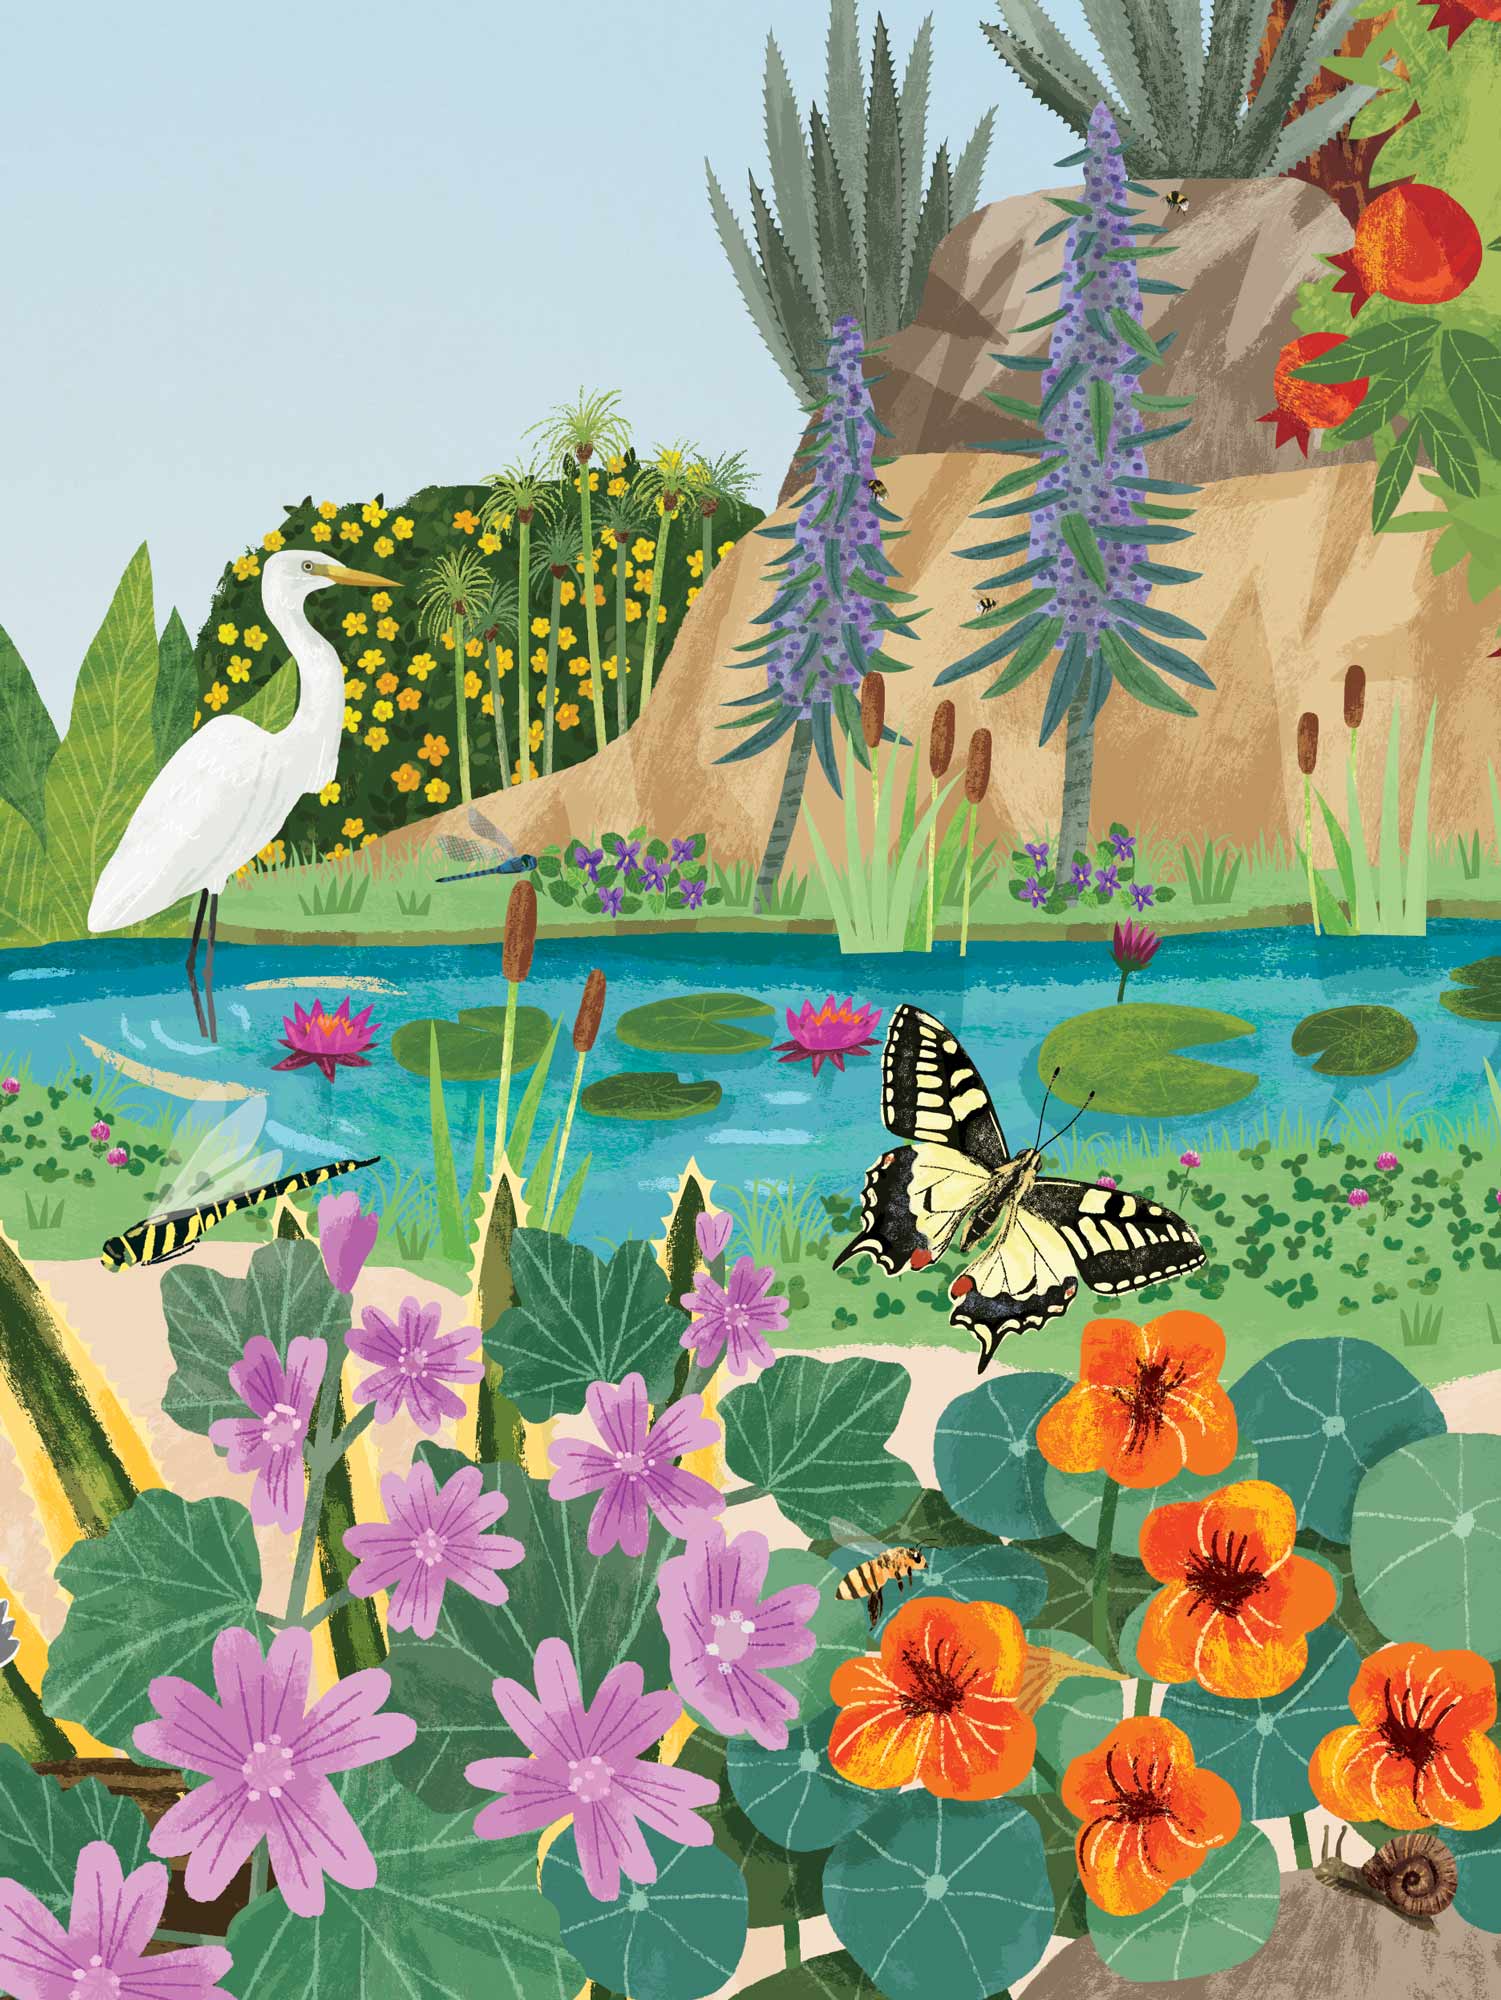 From Foraging: The Complete Guide to Kids and Families illustrated by Elly Jahnz, published by Puffin Books